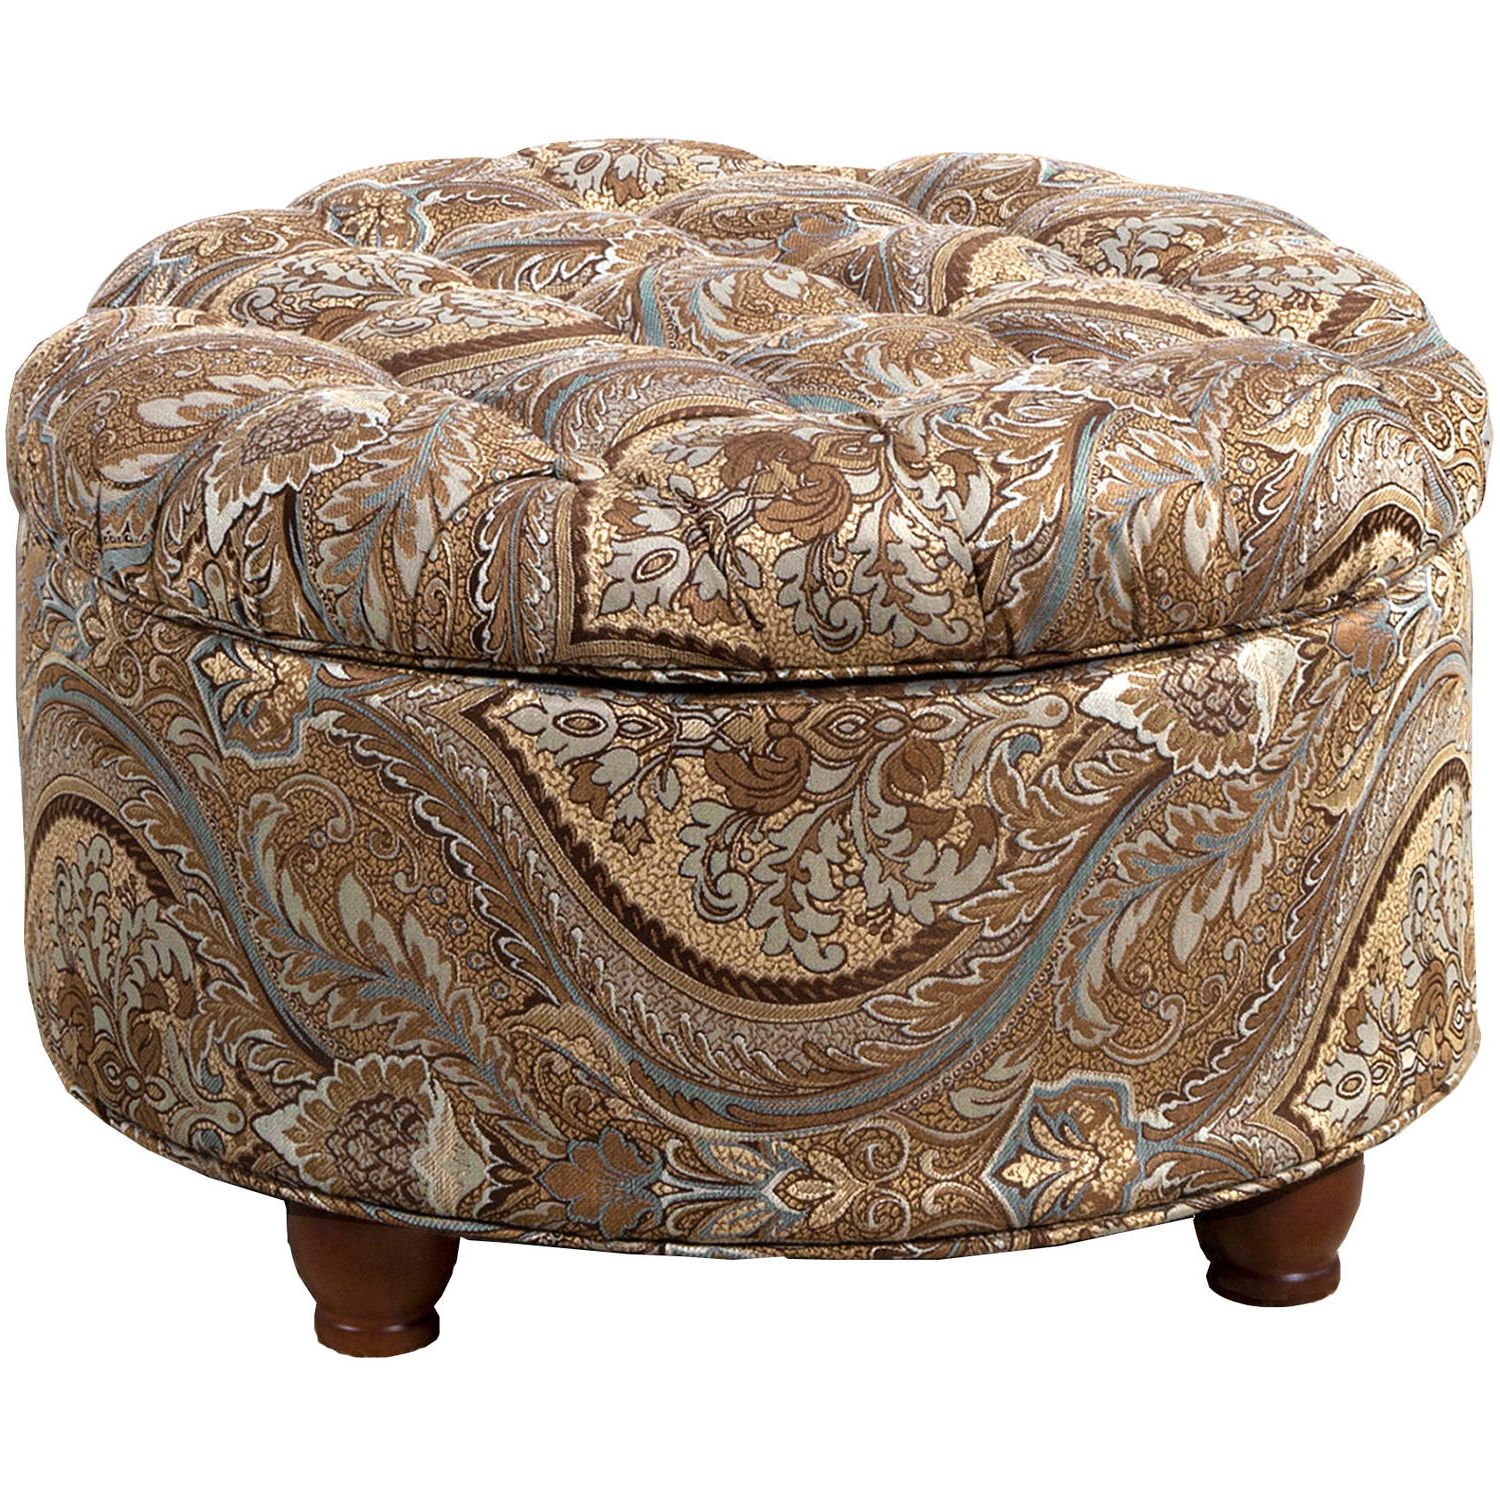 Homepop Large Tufted Round Storage Ottoman, Multiple Colors – Walmart With Recent Fabric Tufted Storage Ottomans (View 8 of 10)